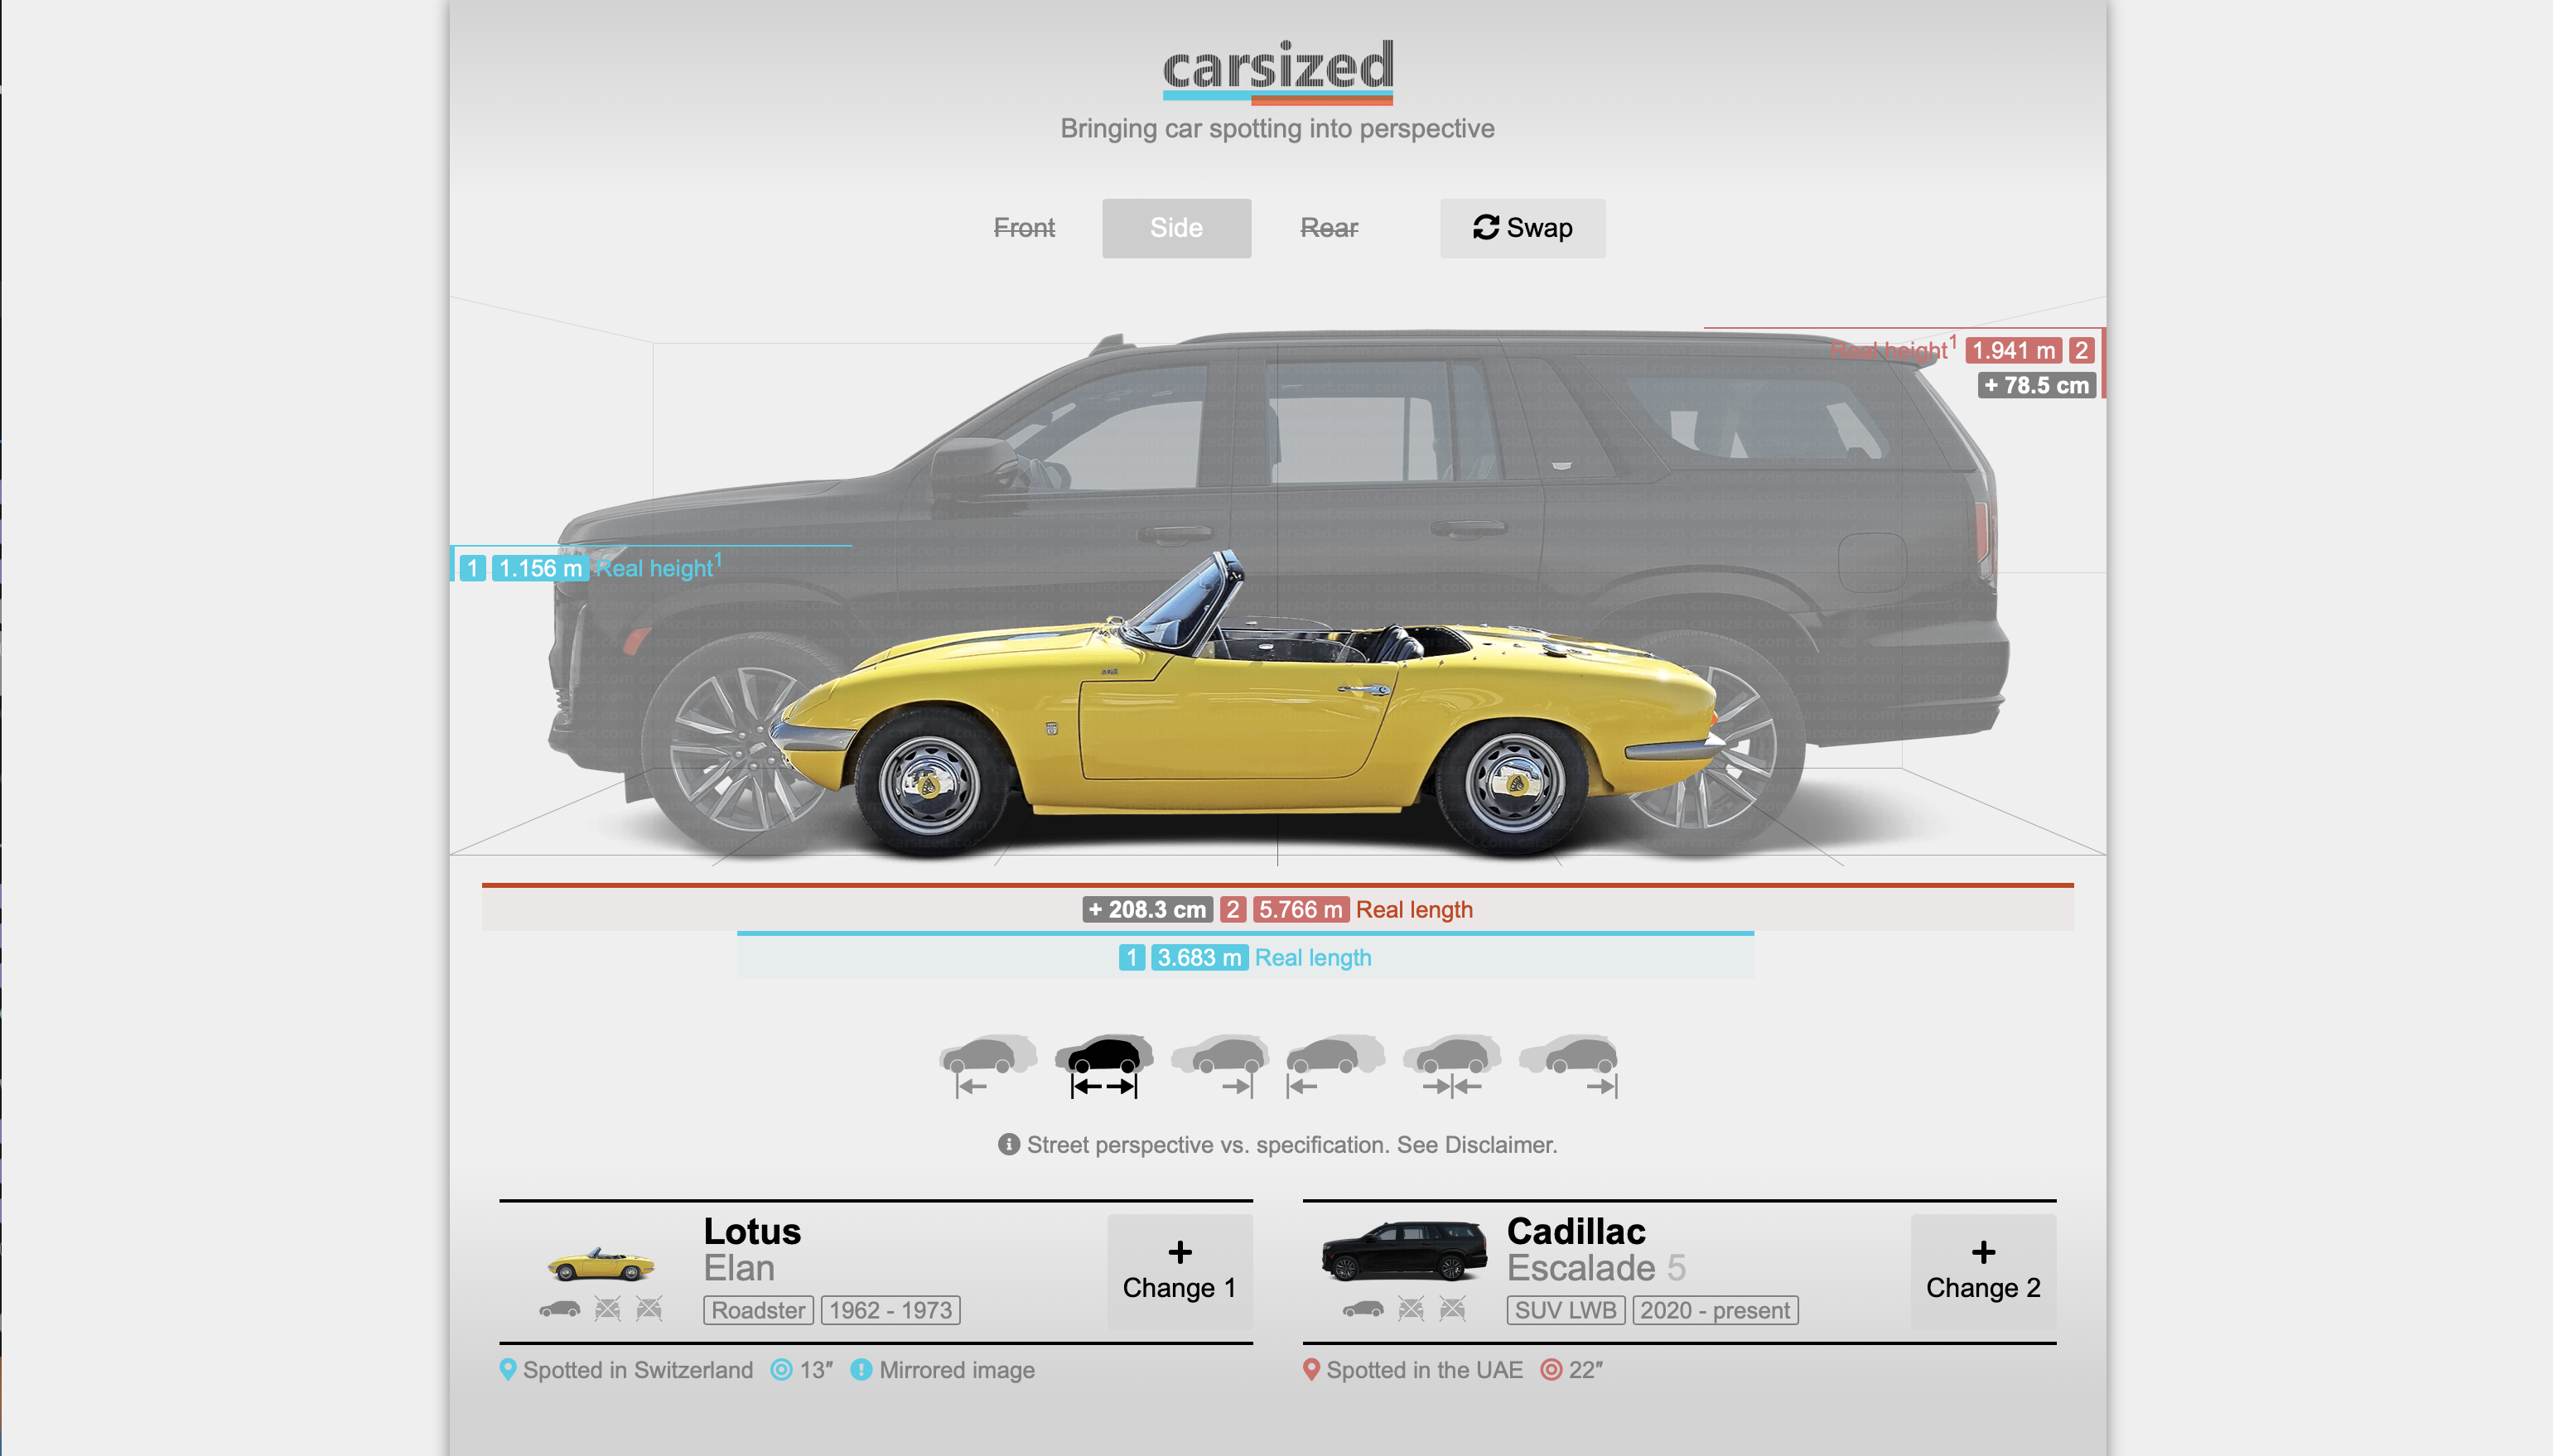 See How Much Bigger Cars Really Are Today With This Neat Visualizer Tool